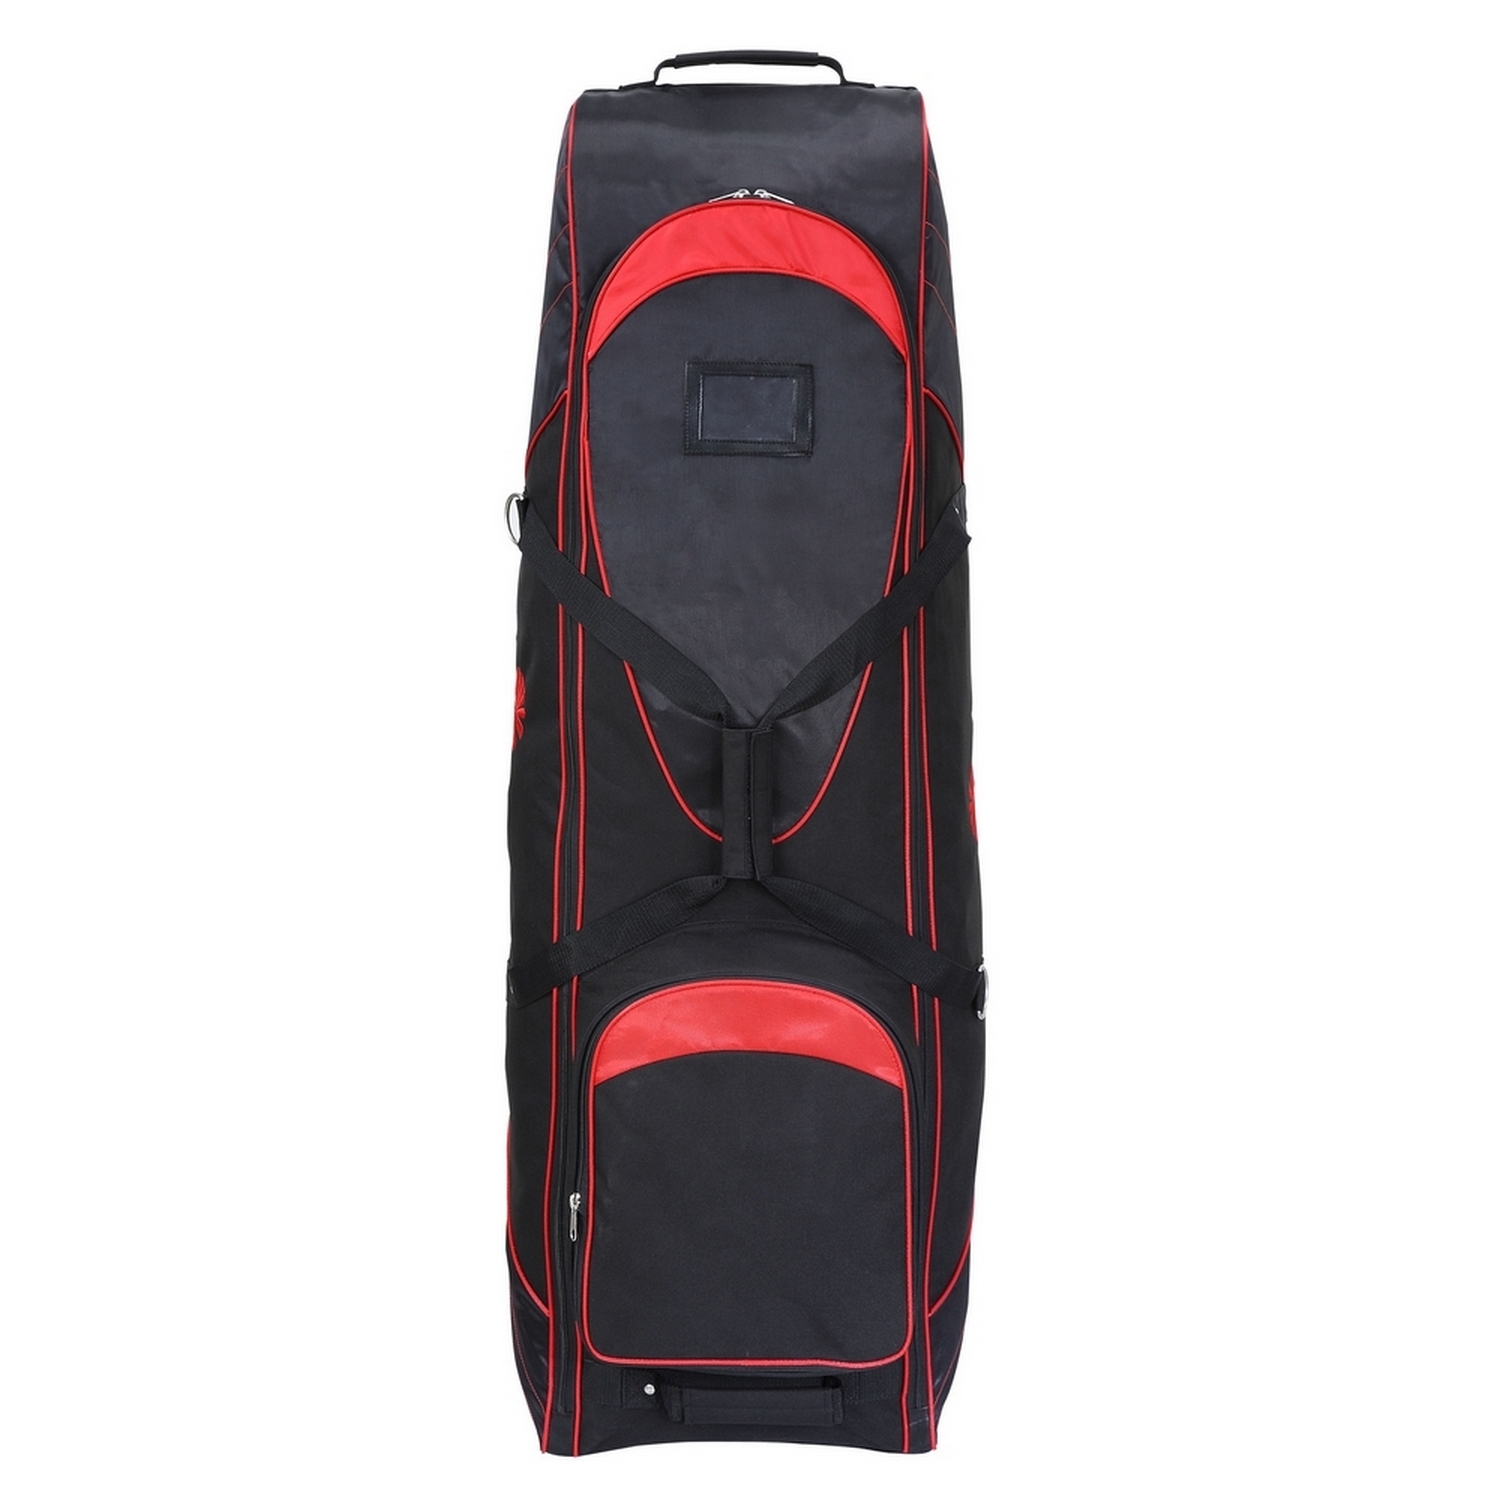 Palm Springs Golf Bag Tour Travel Cover V2 With Wheels Black/Red - image 2 of 3